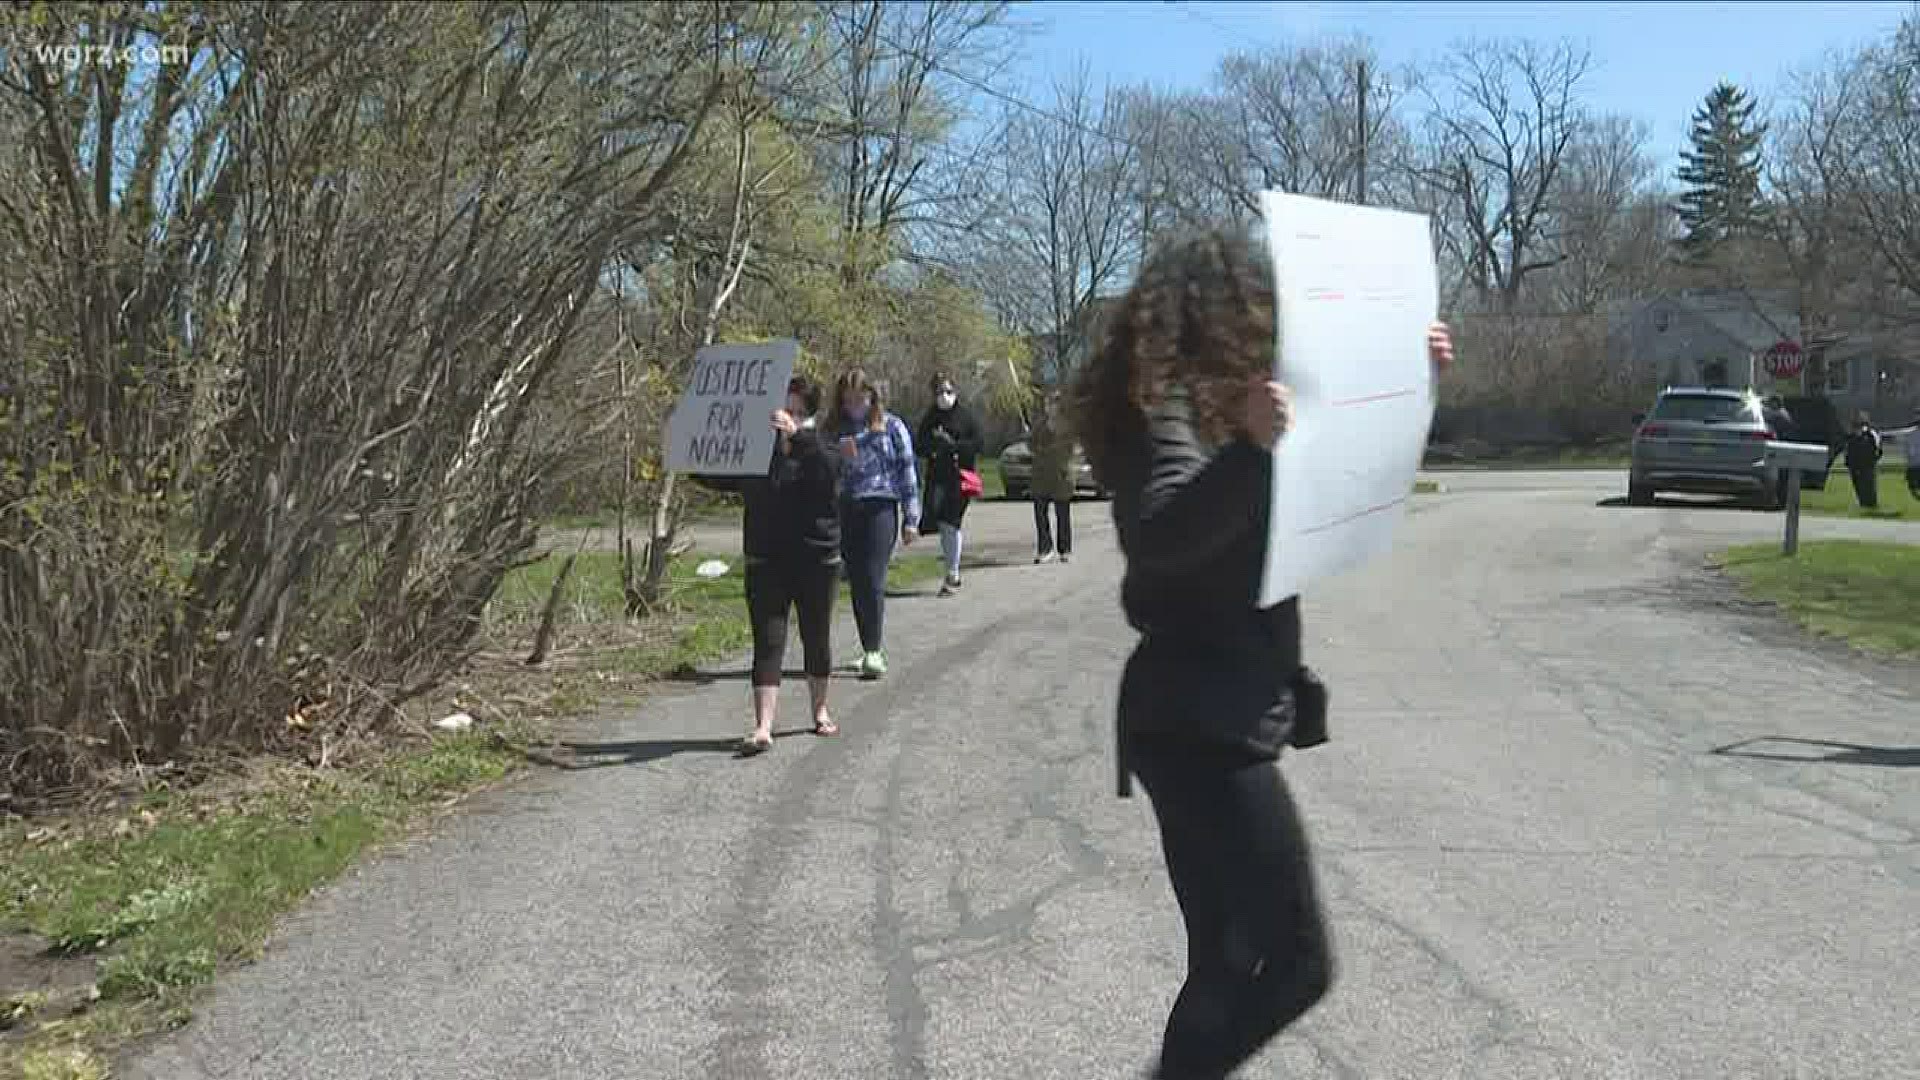 People rallied outside the home of a 5 year old boy on Lewiston Road a day after state police accused 48 year old Michael Wilson senior of assaulting him.